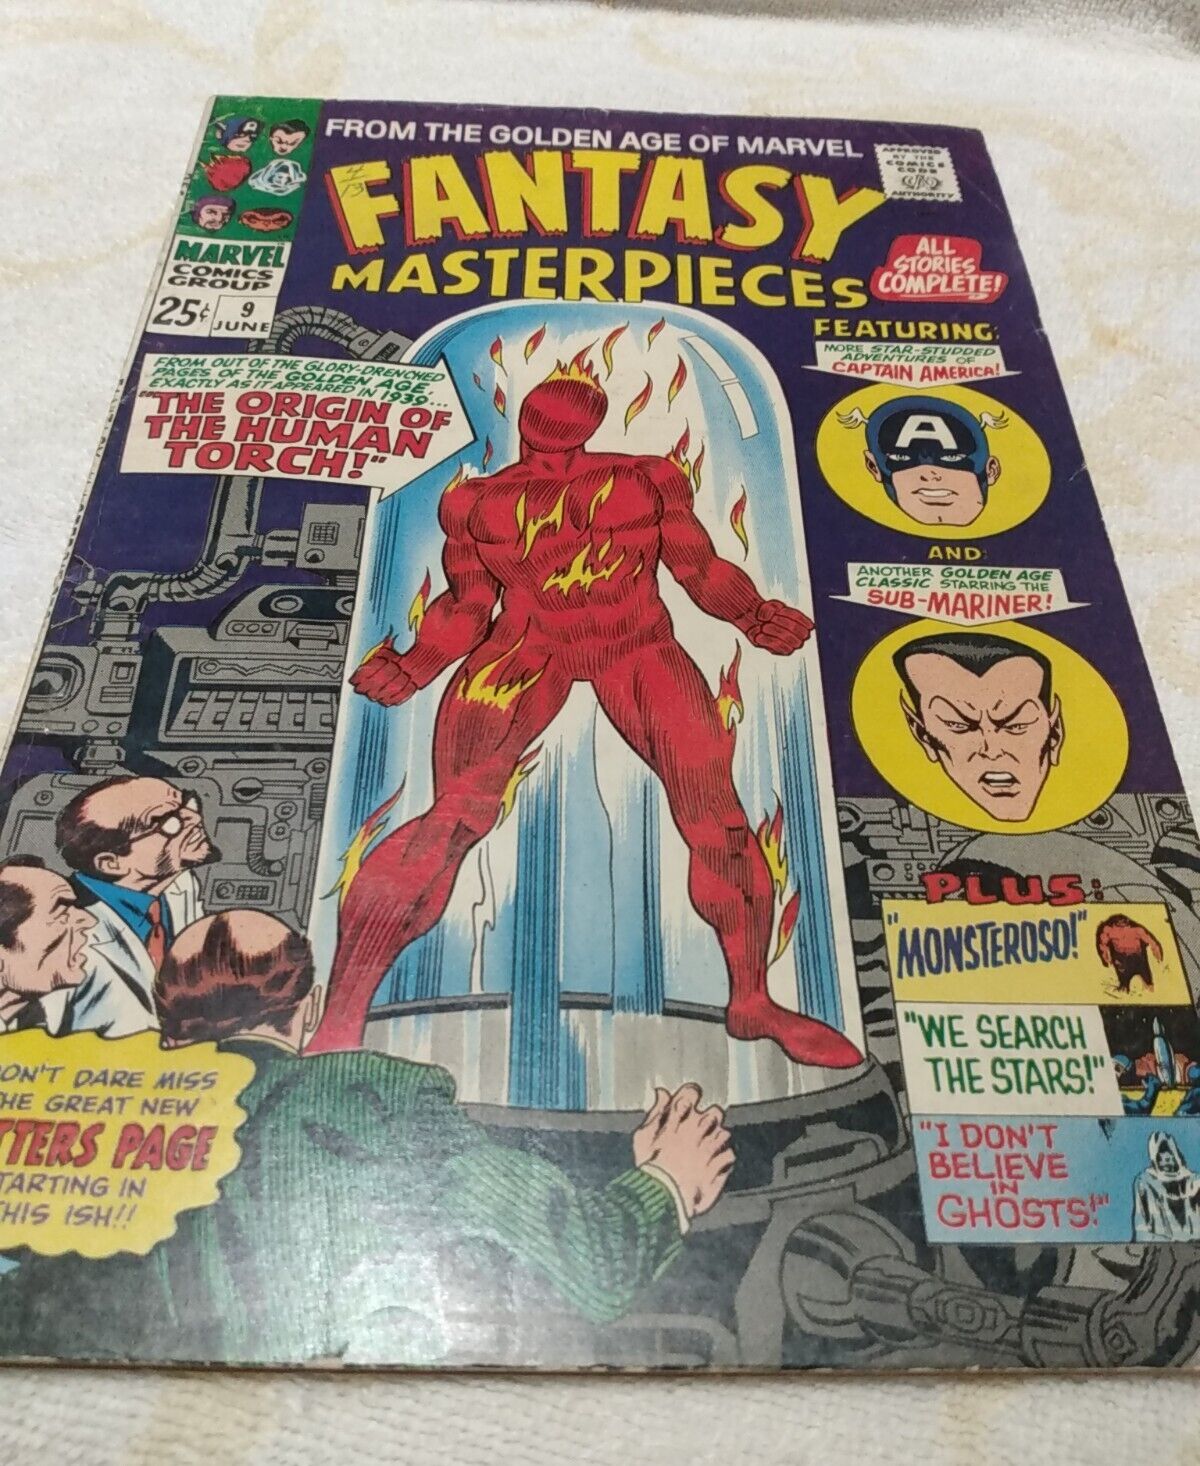 Fantasy Masterpieces #9 Origin Human Torch re: Marvel #1 VG+or nicer 1967 Giant